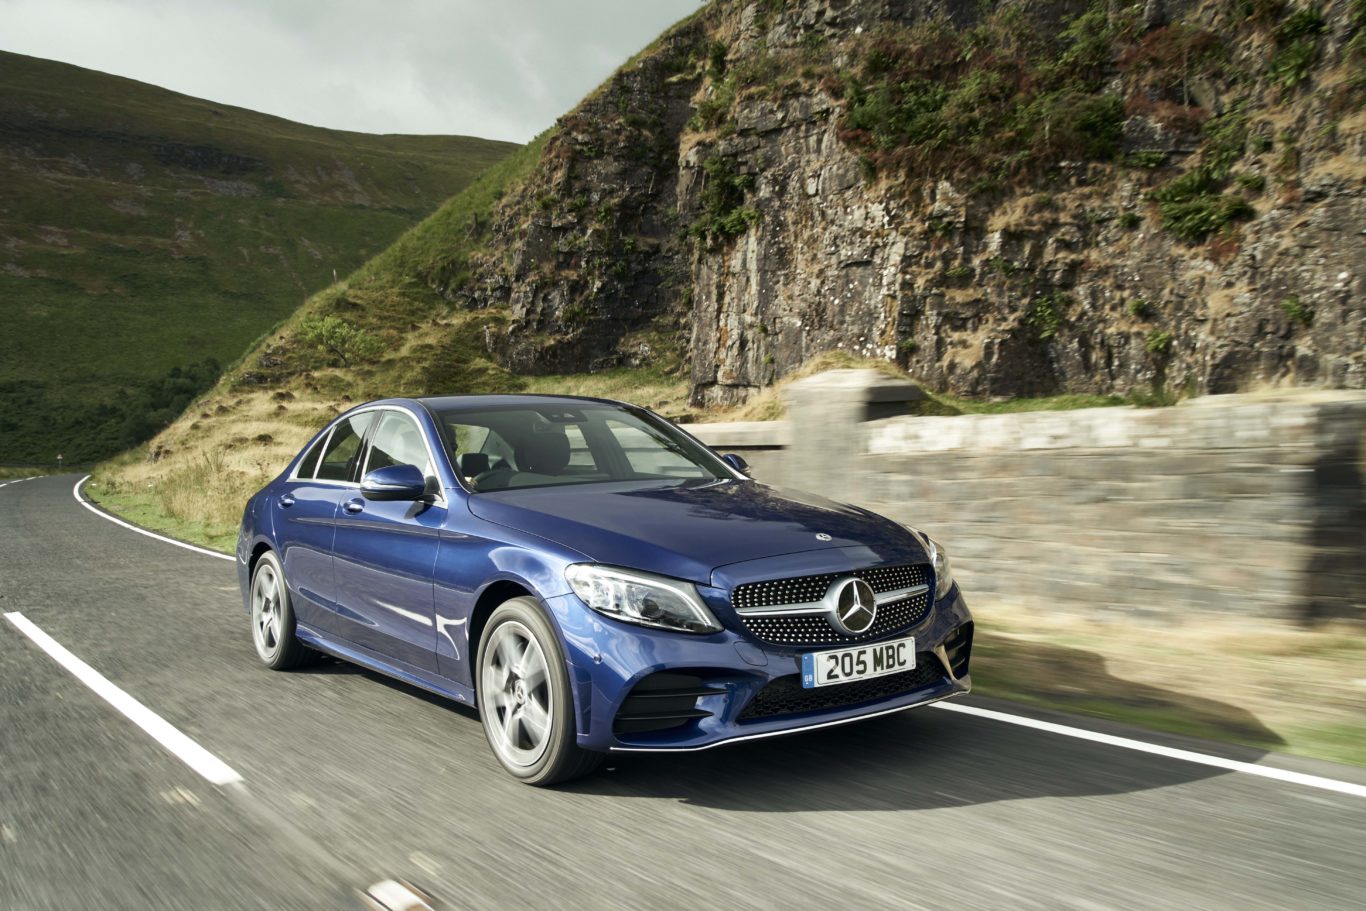 The C-Class gains a refreshed front end